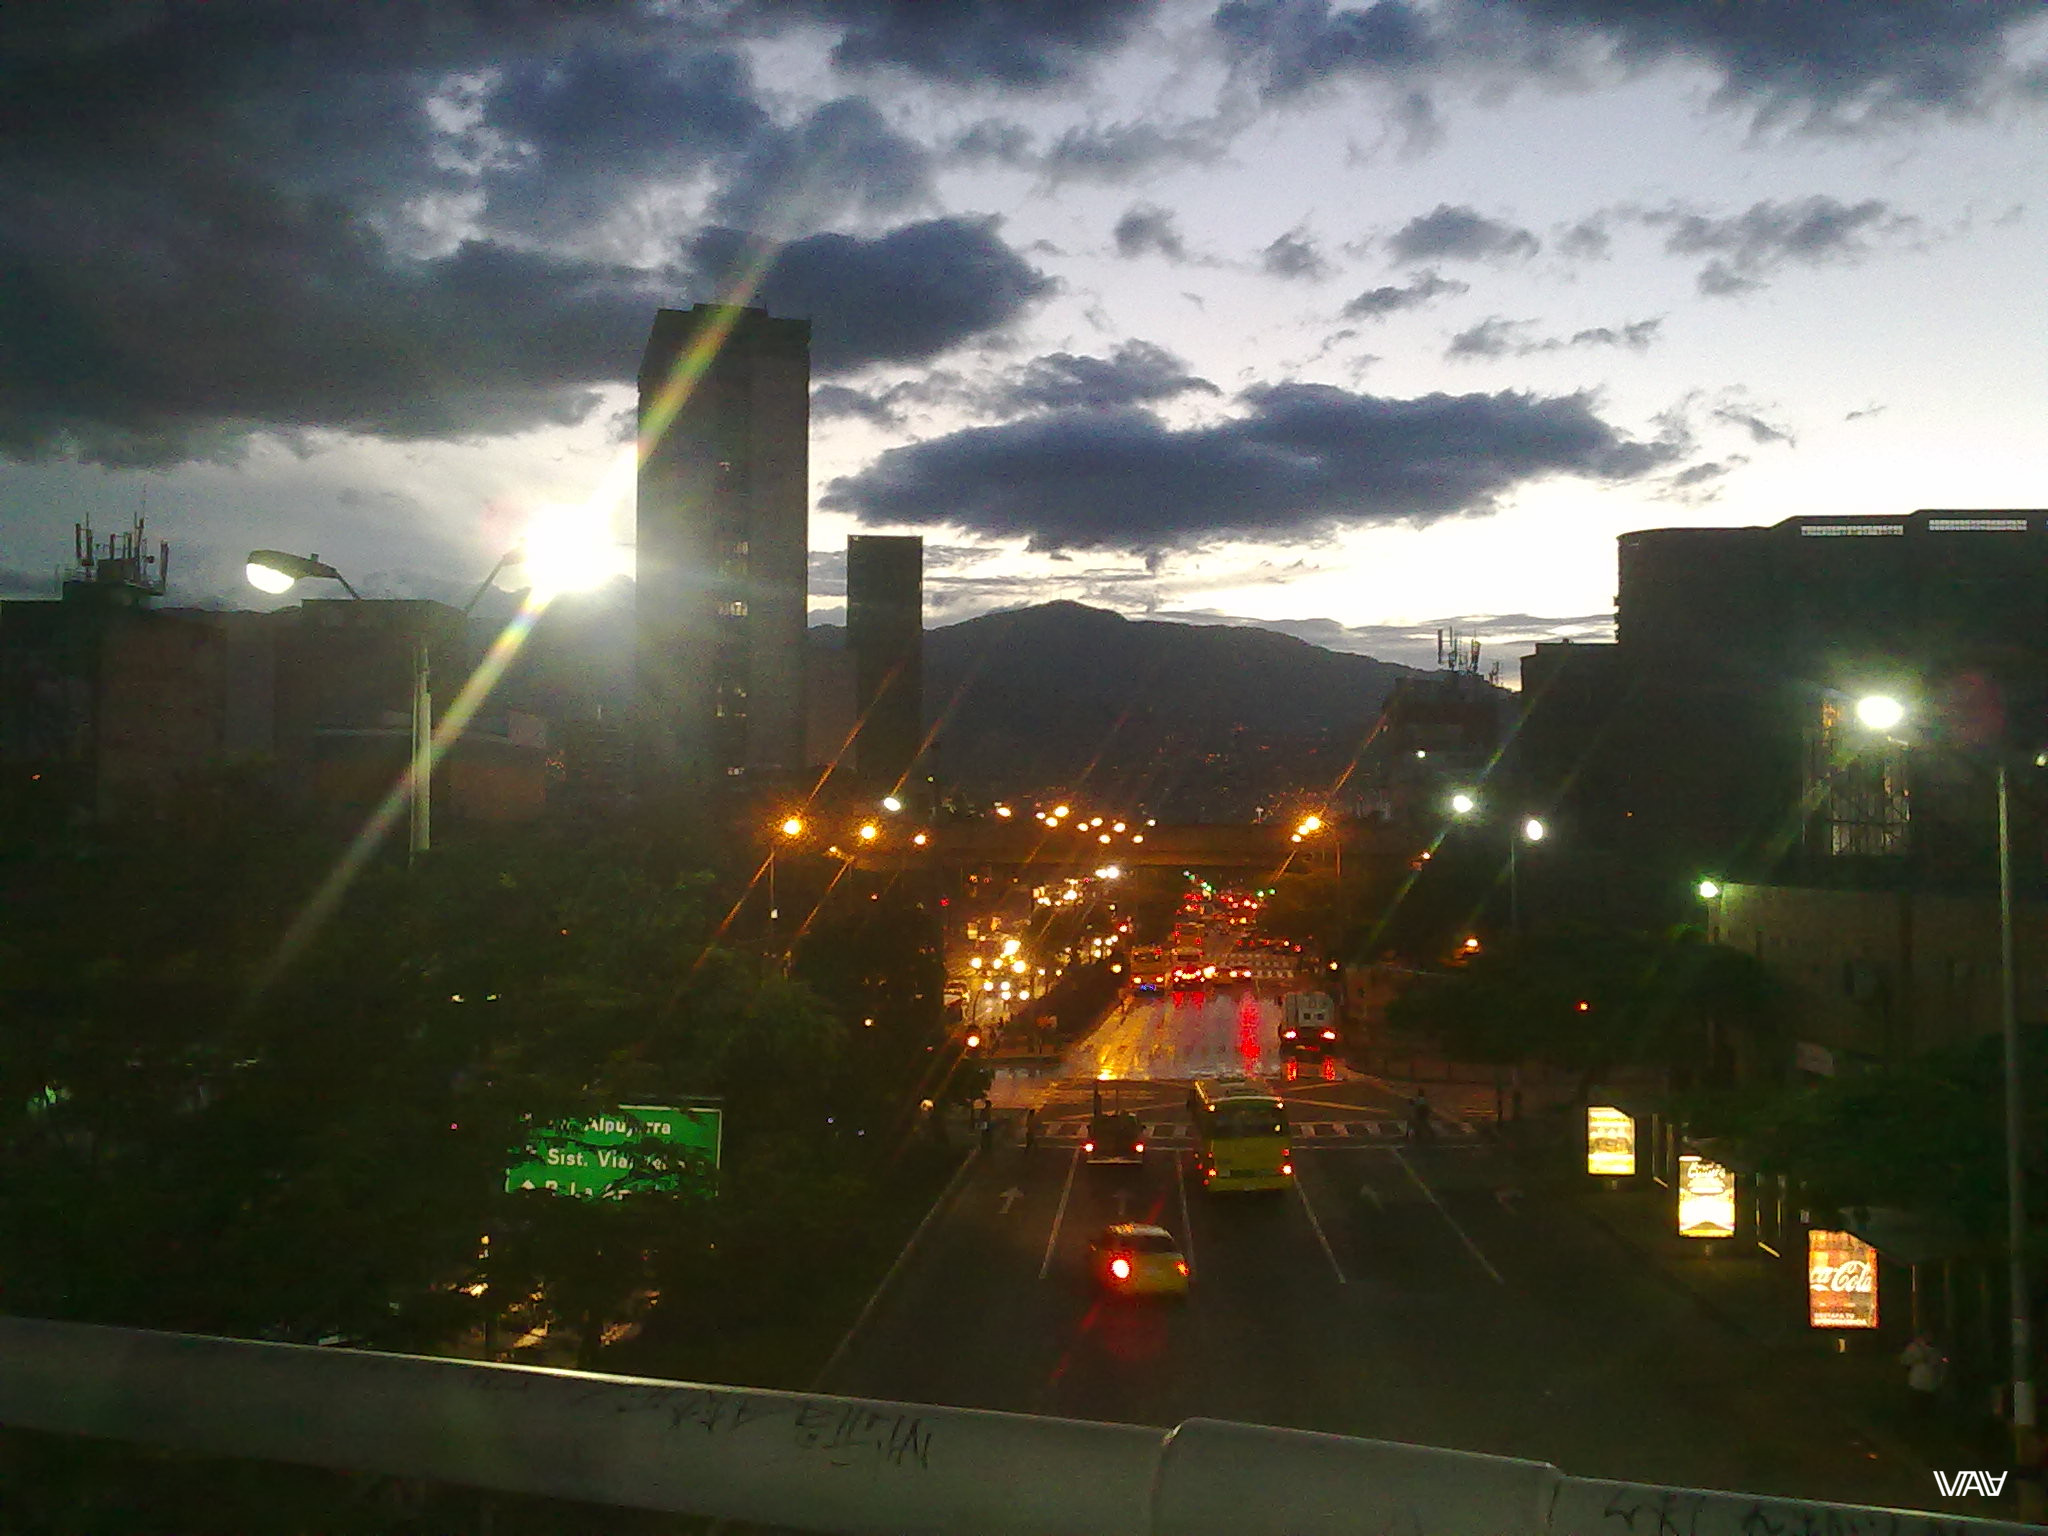 Sunset in the city of Medellin, Colombia